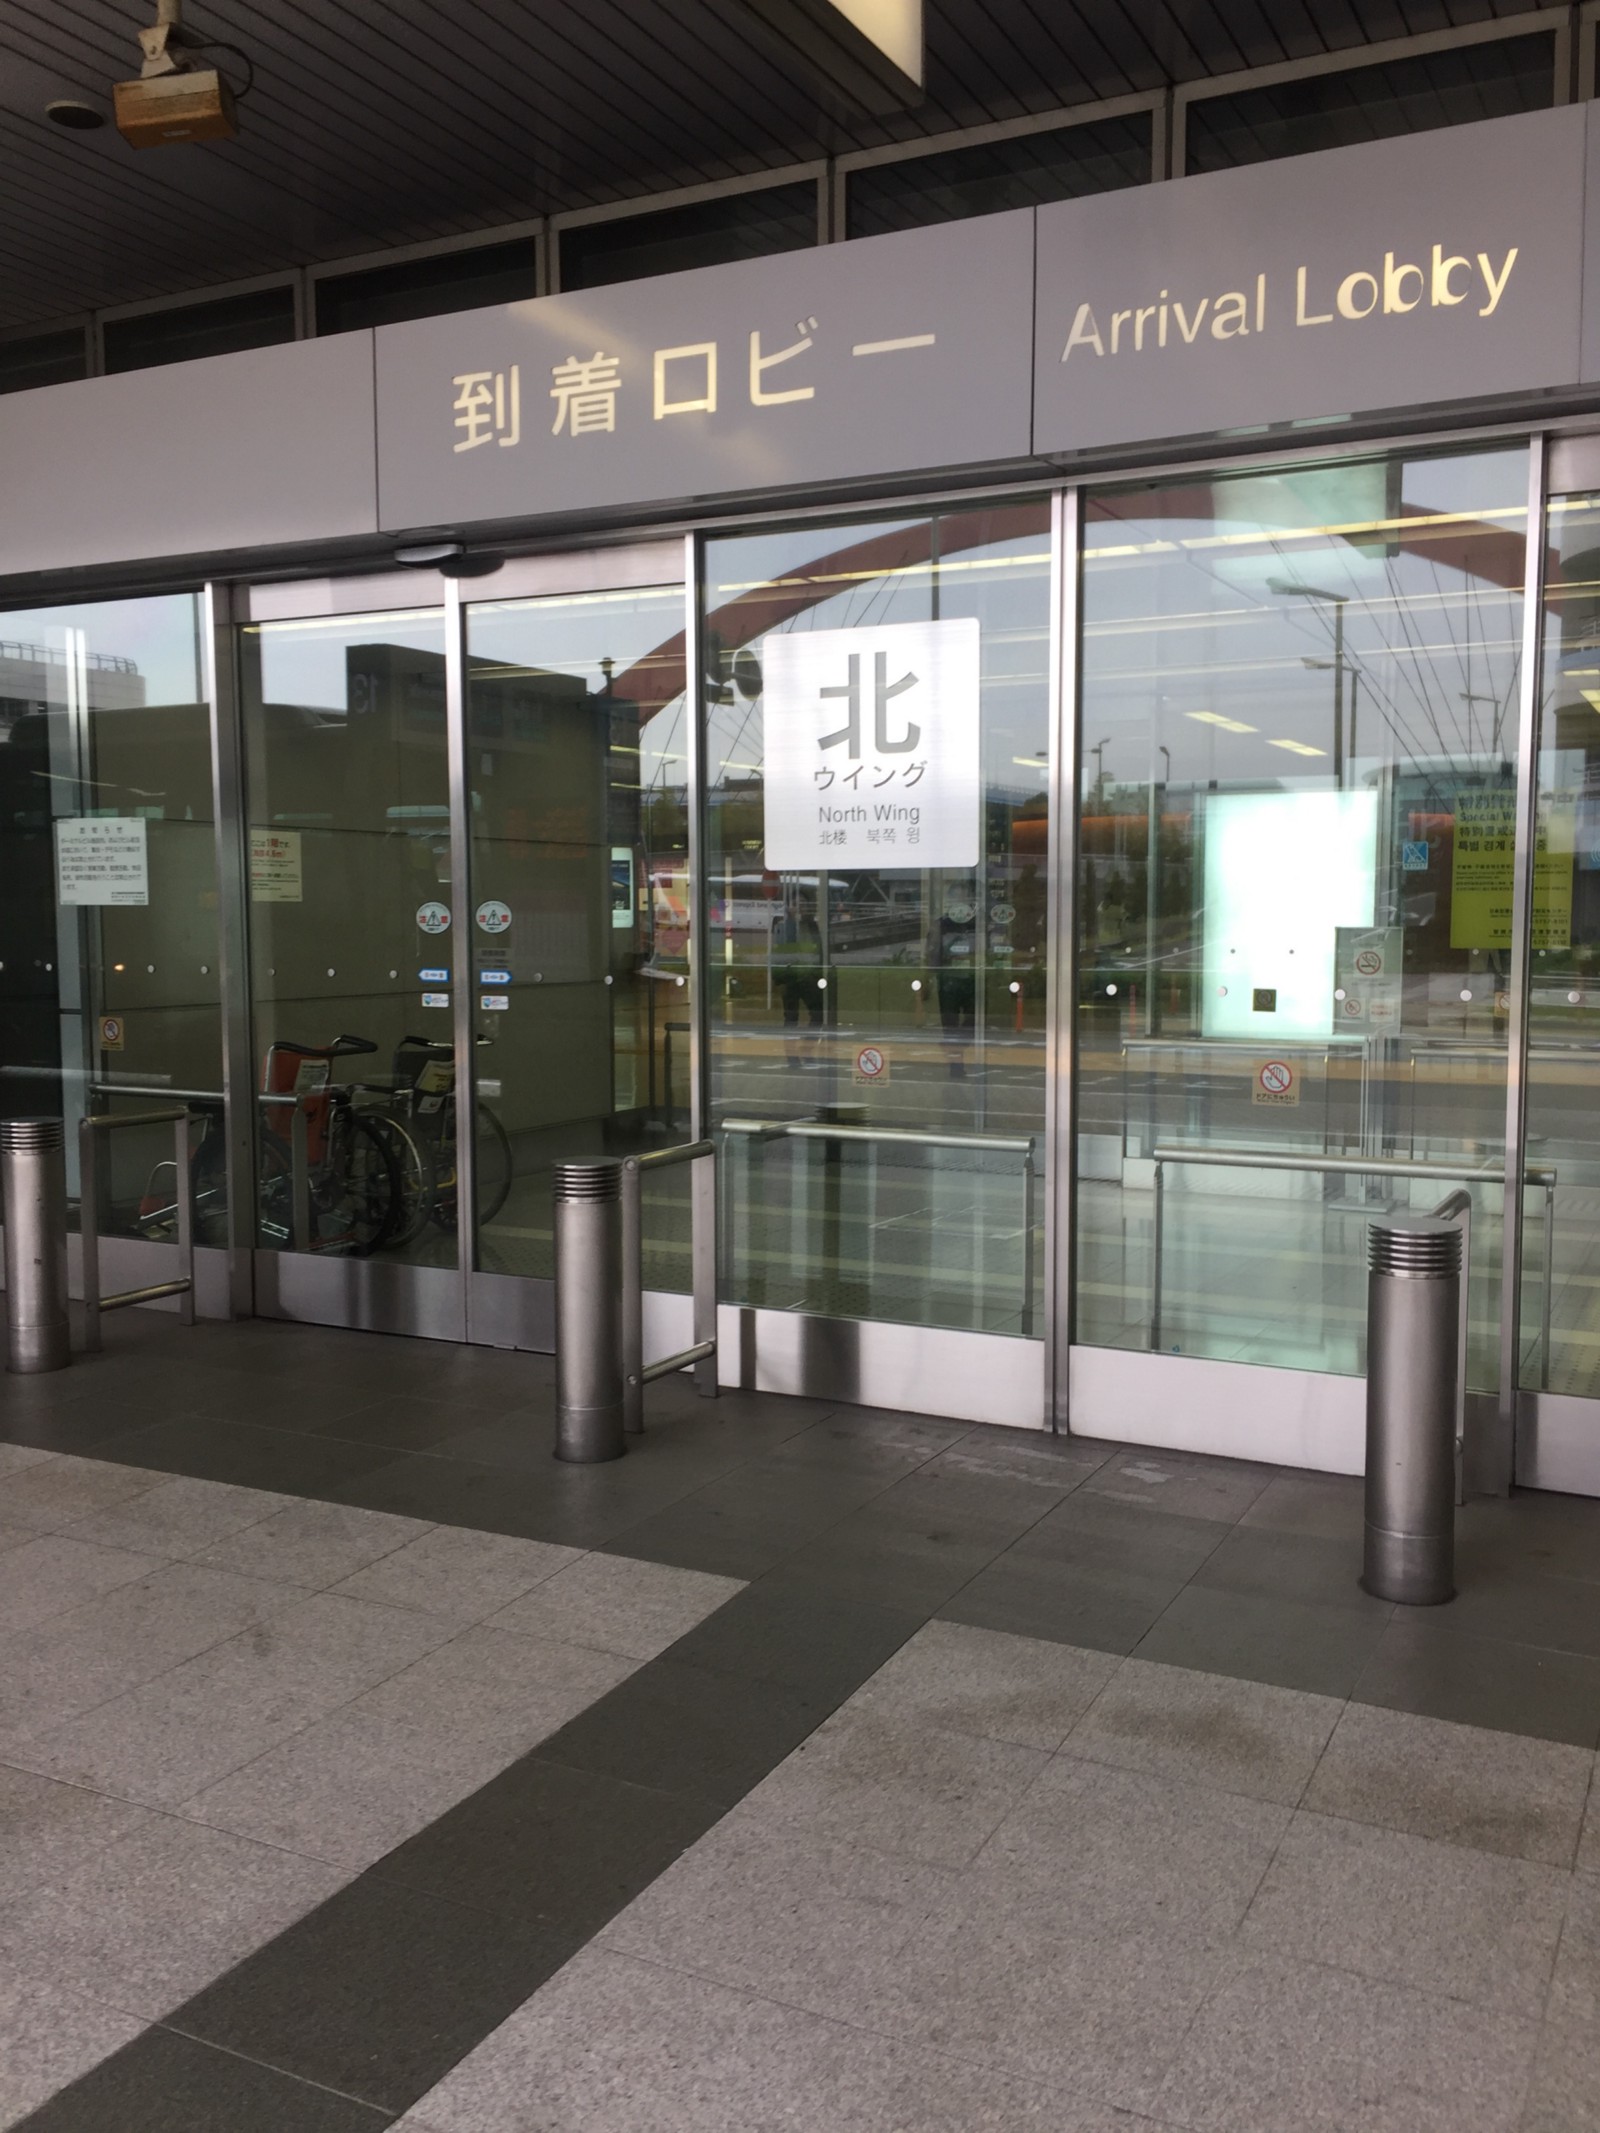 How To Get To The Post Office At Haneda Airport Domestic Terminal